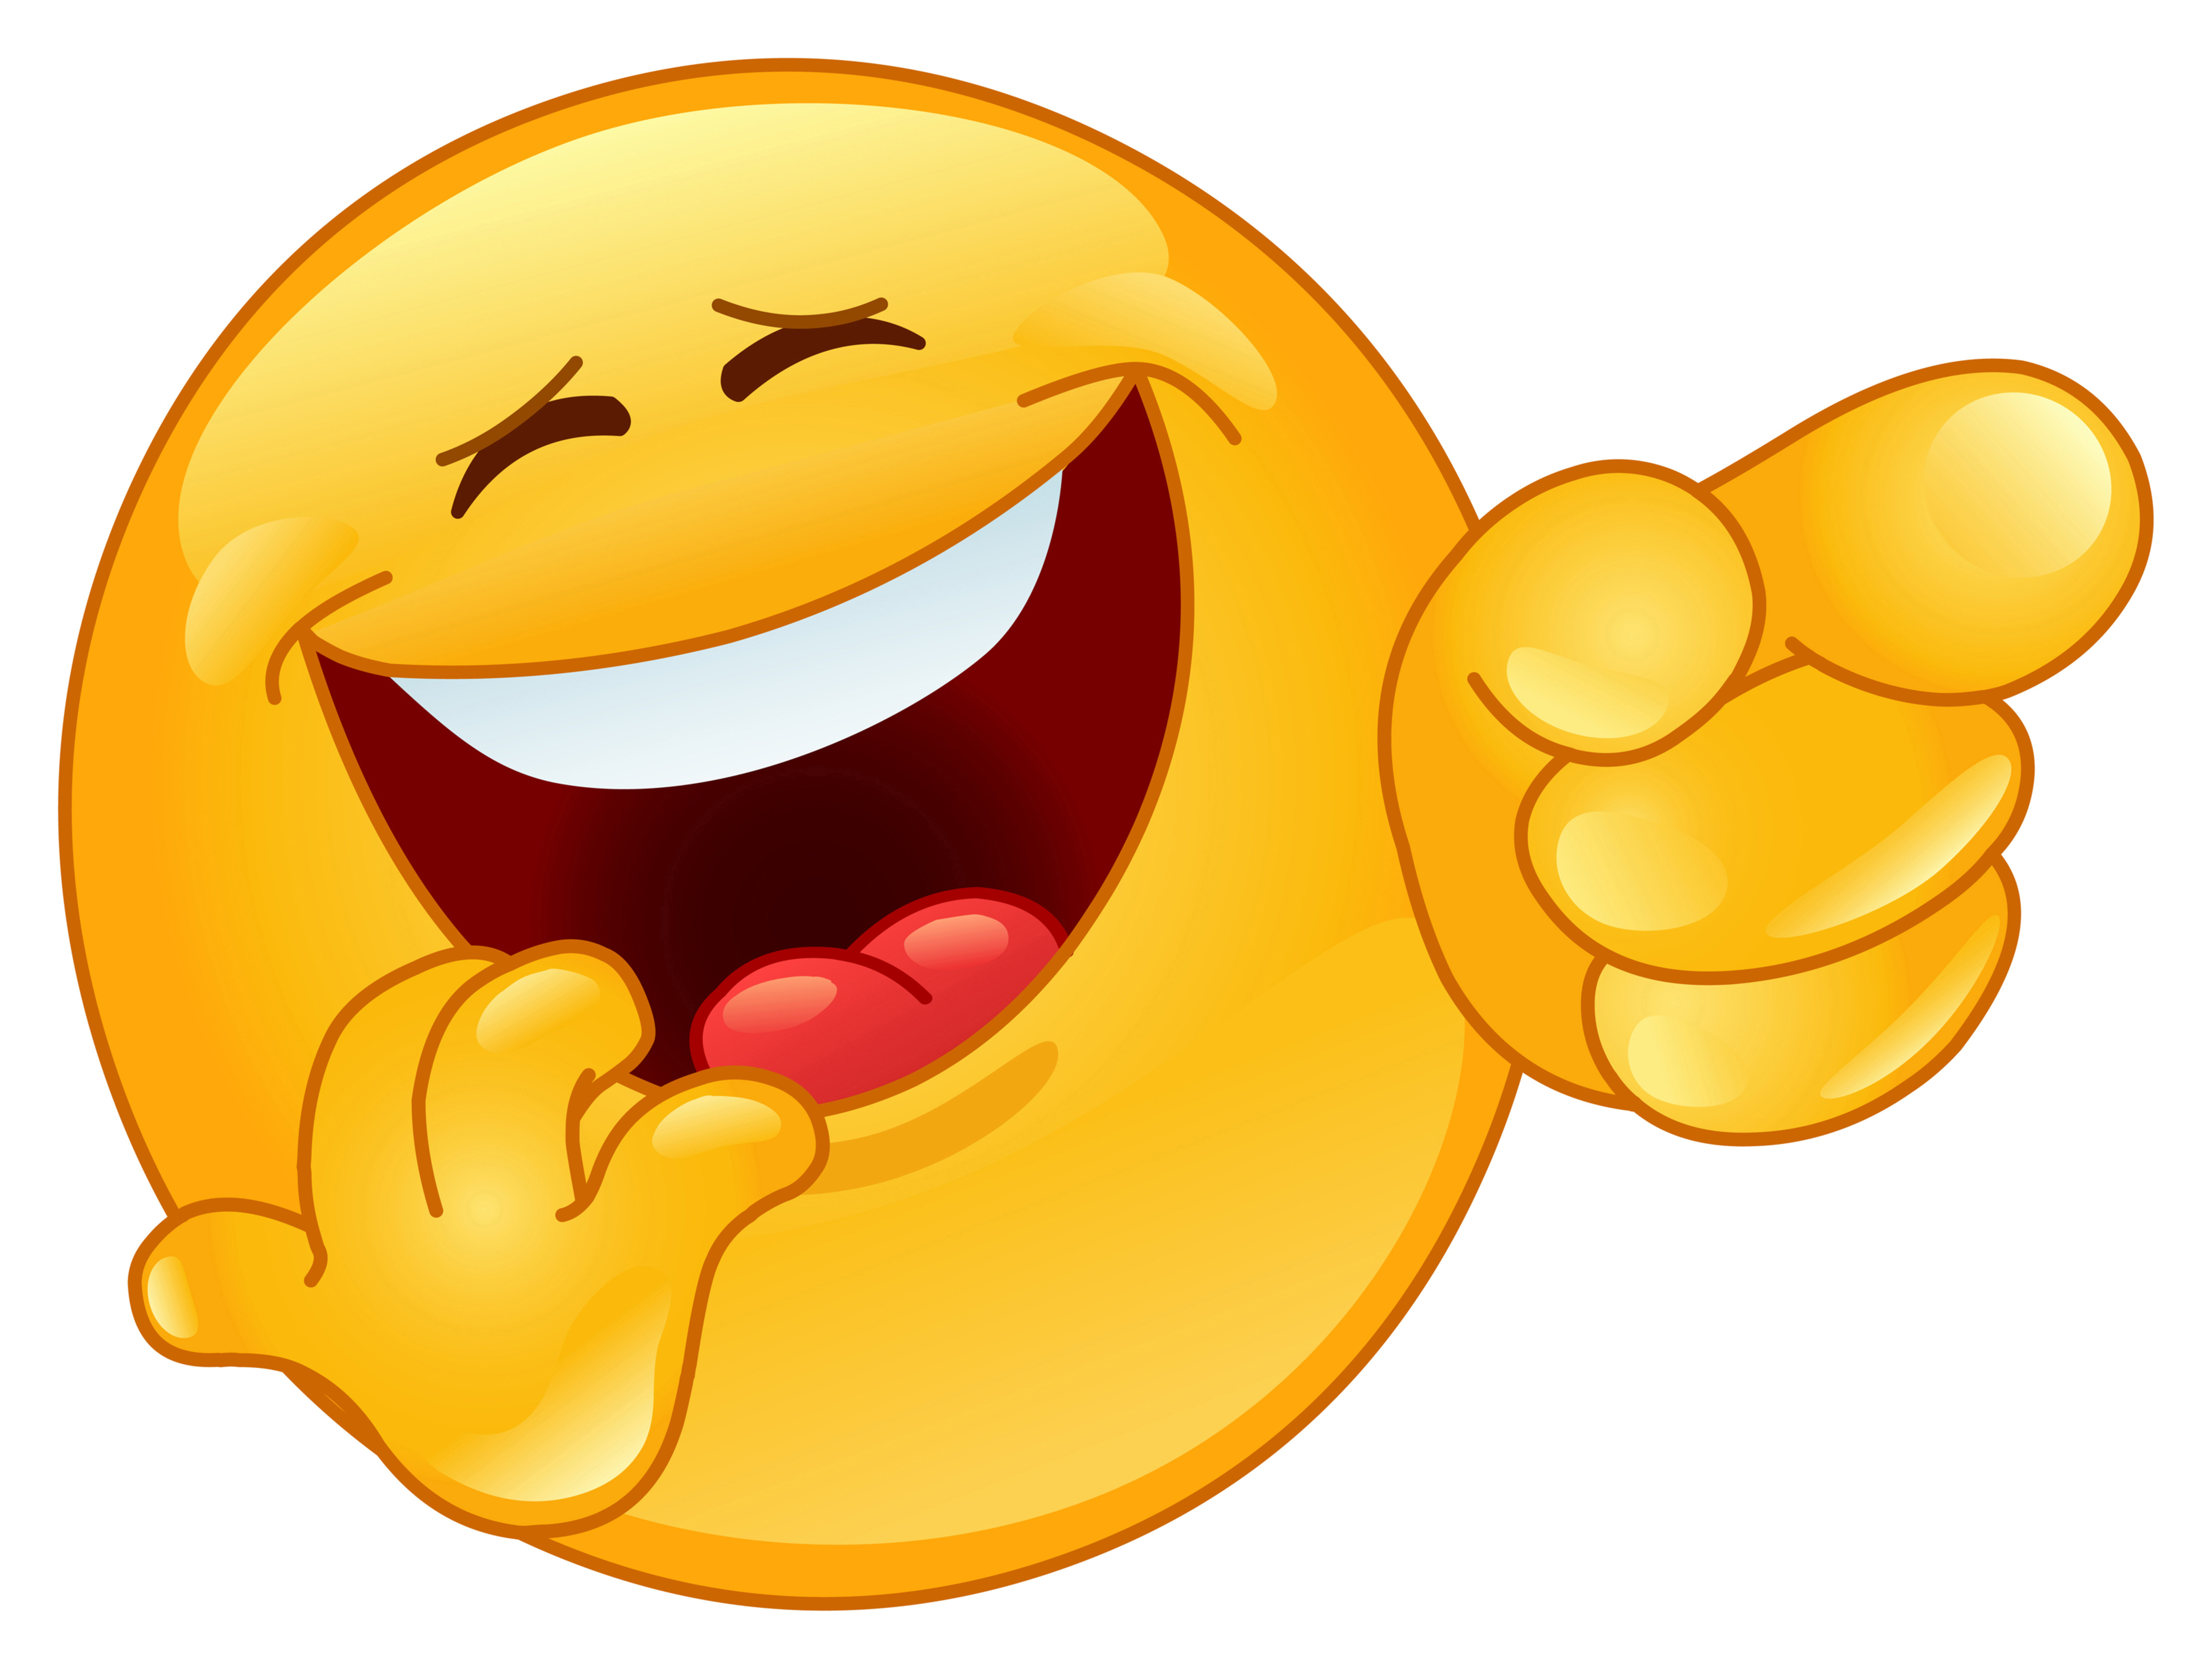 9 Funny Laughing Emoticons Images